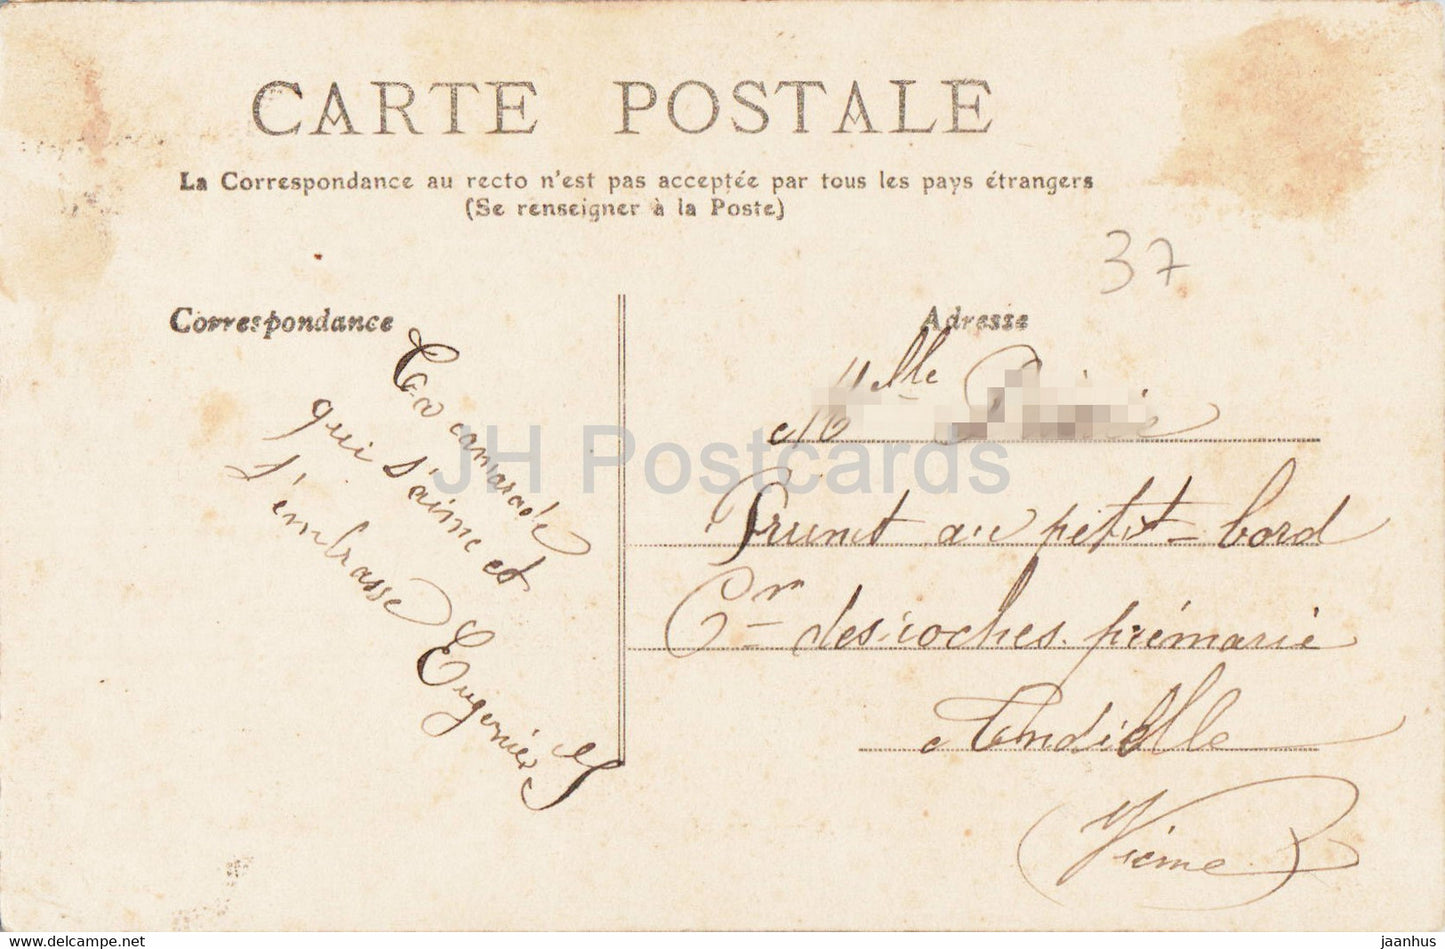 Tours - Le Musee - museum - 57 - old postcard - France - used